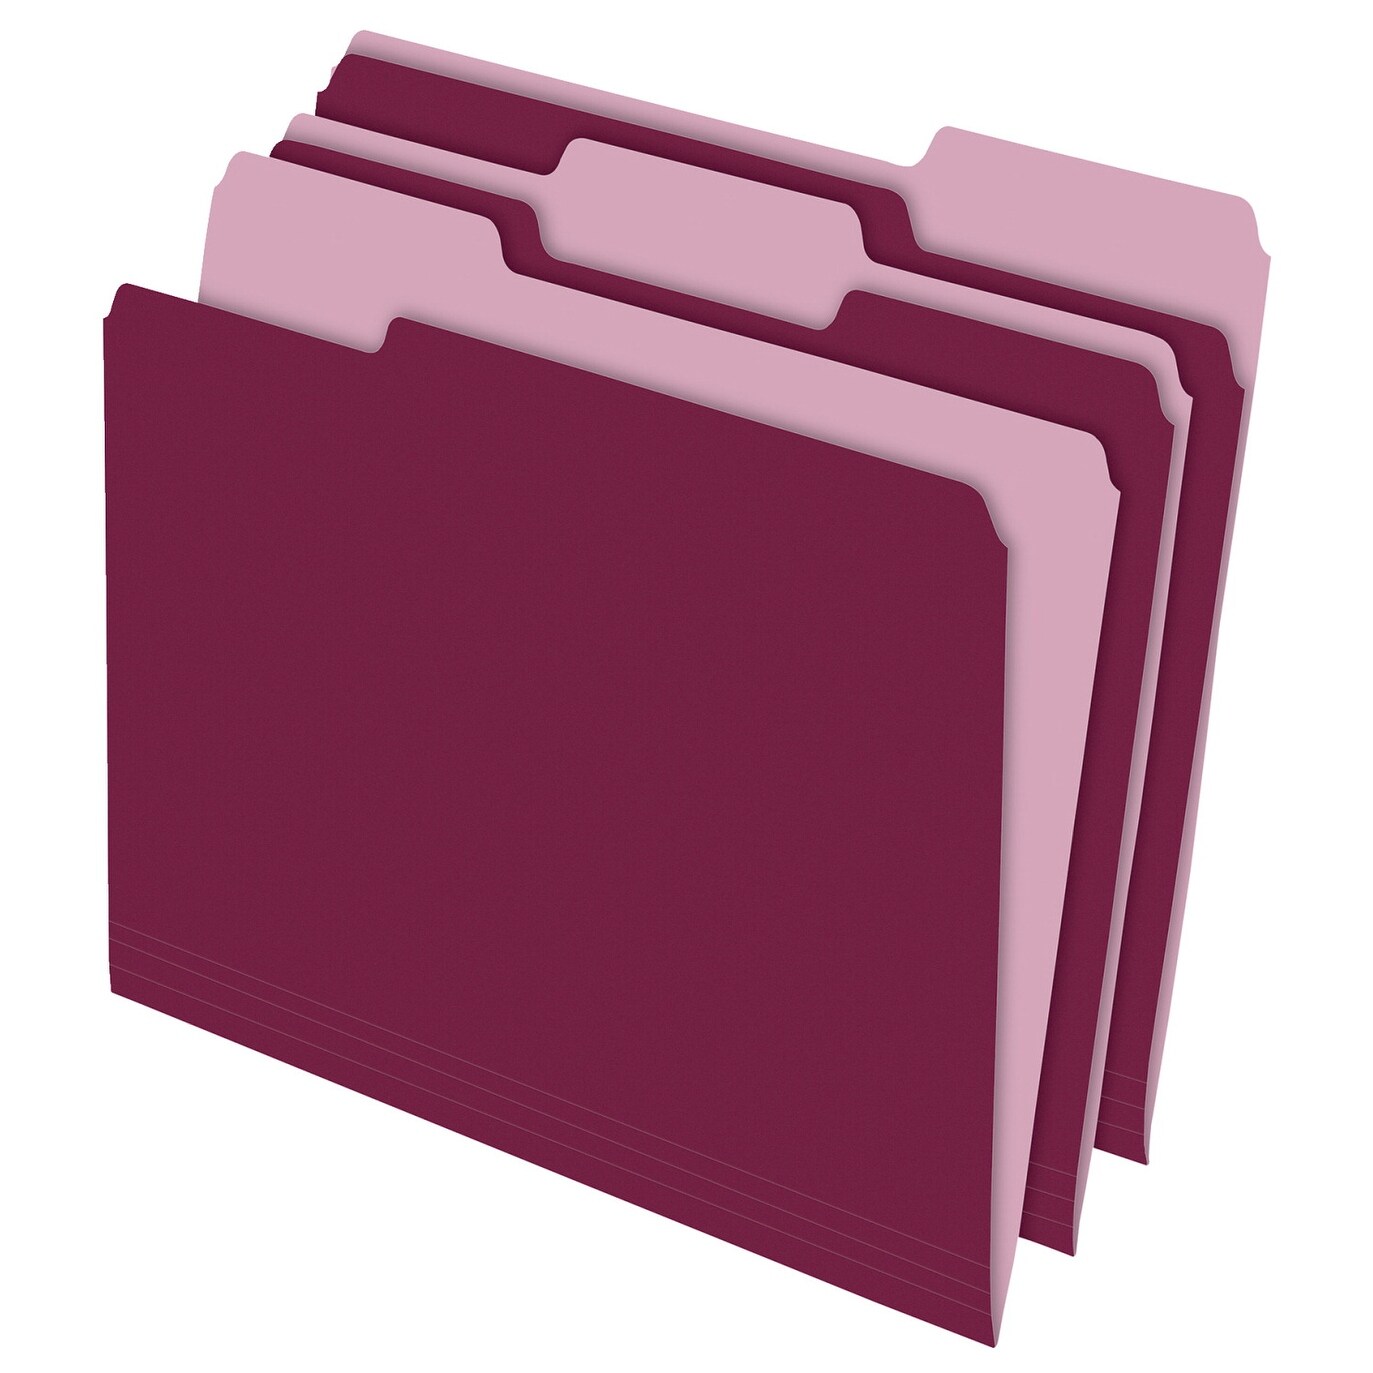 Pendaflex 1/3 Top Tab File Folders Two Tone Assorted Colors Letter 100 Count